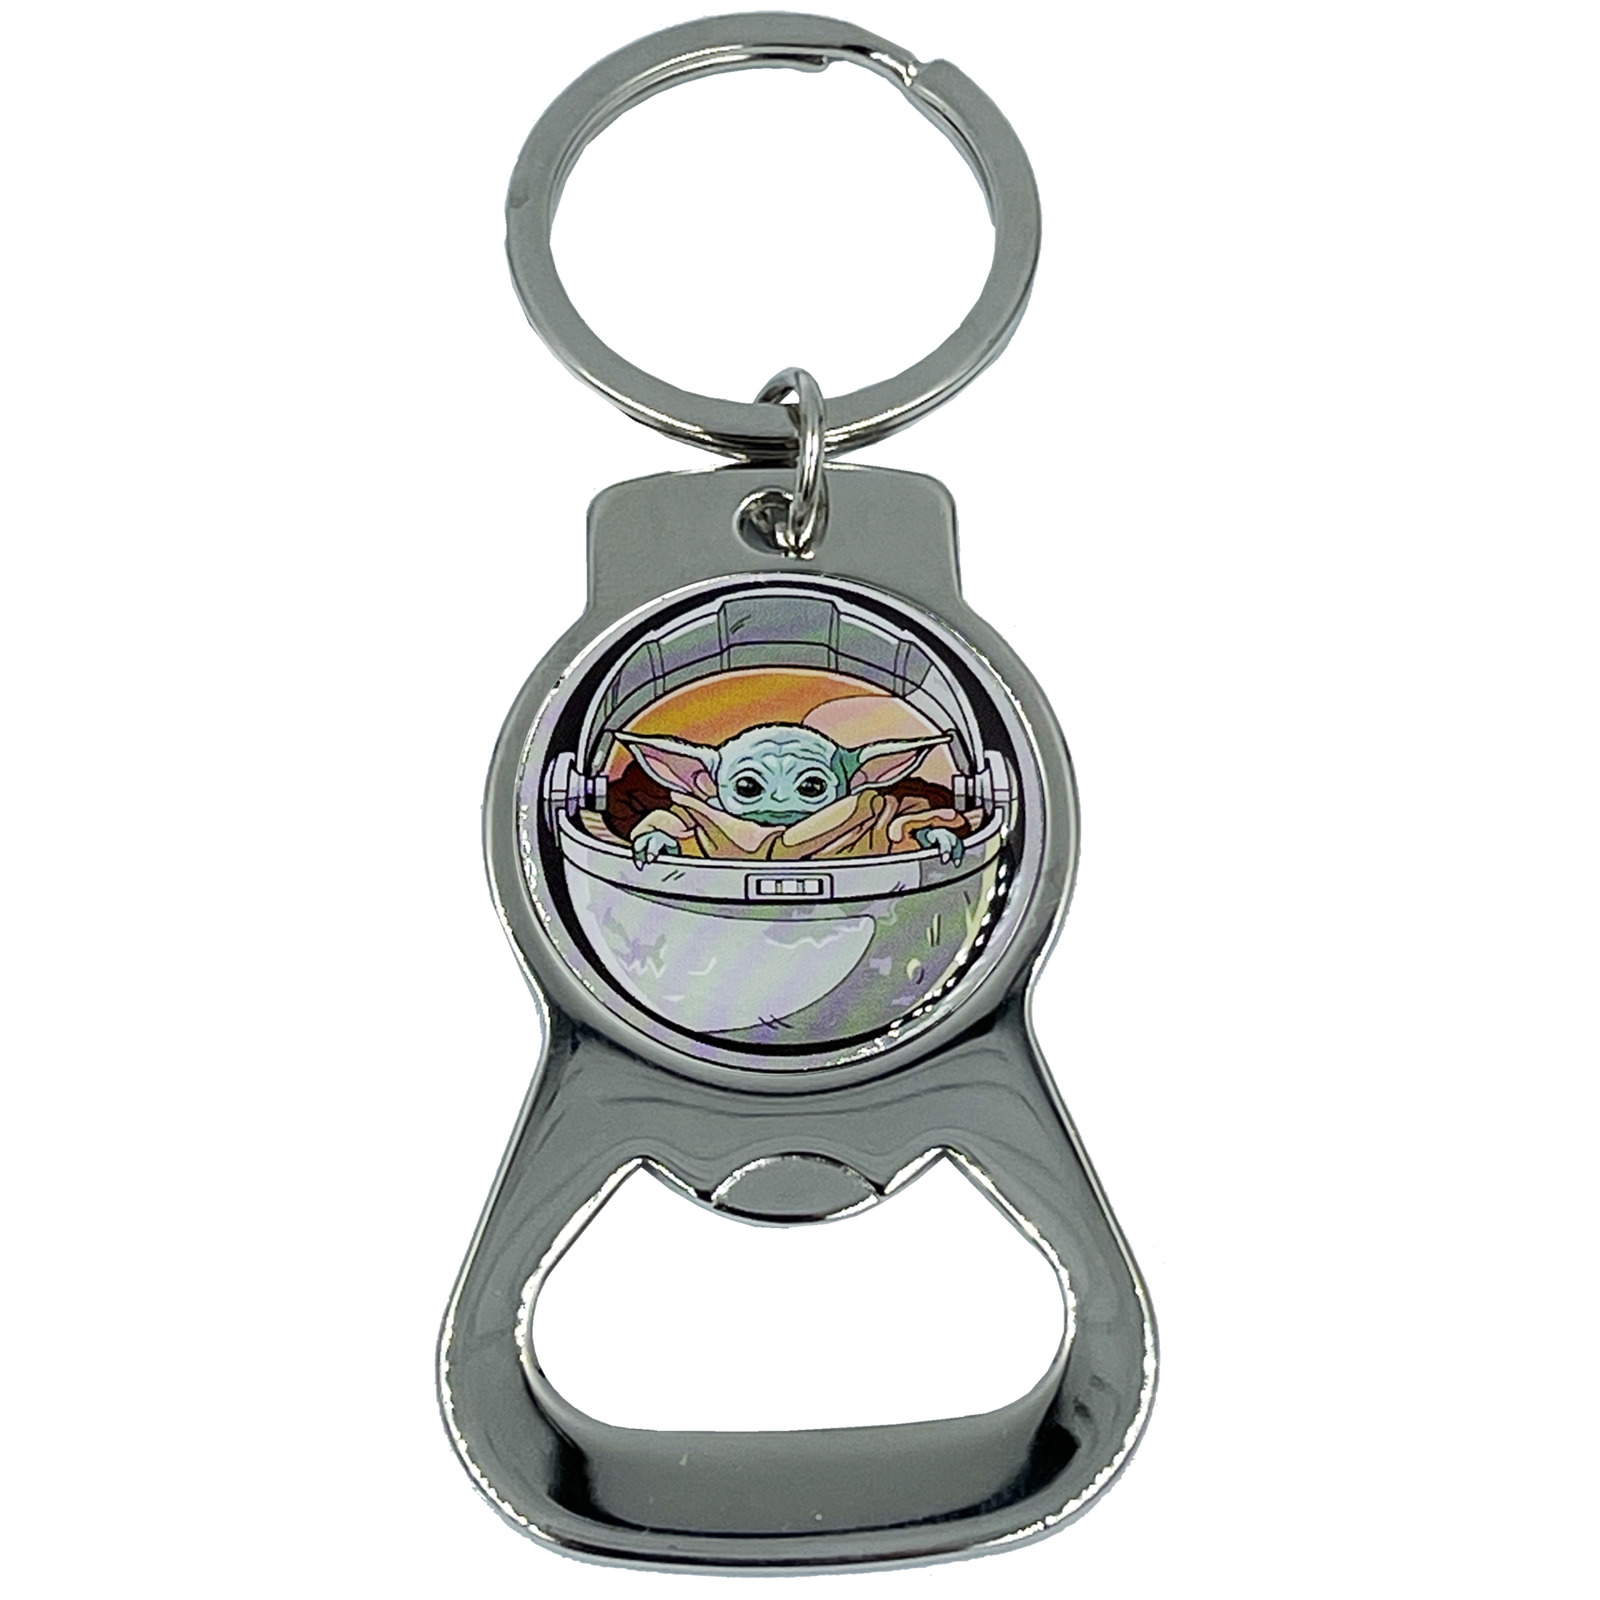 This is the Way Keychain Bottle Opener The Child inspired by Star Wars Mandalori